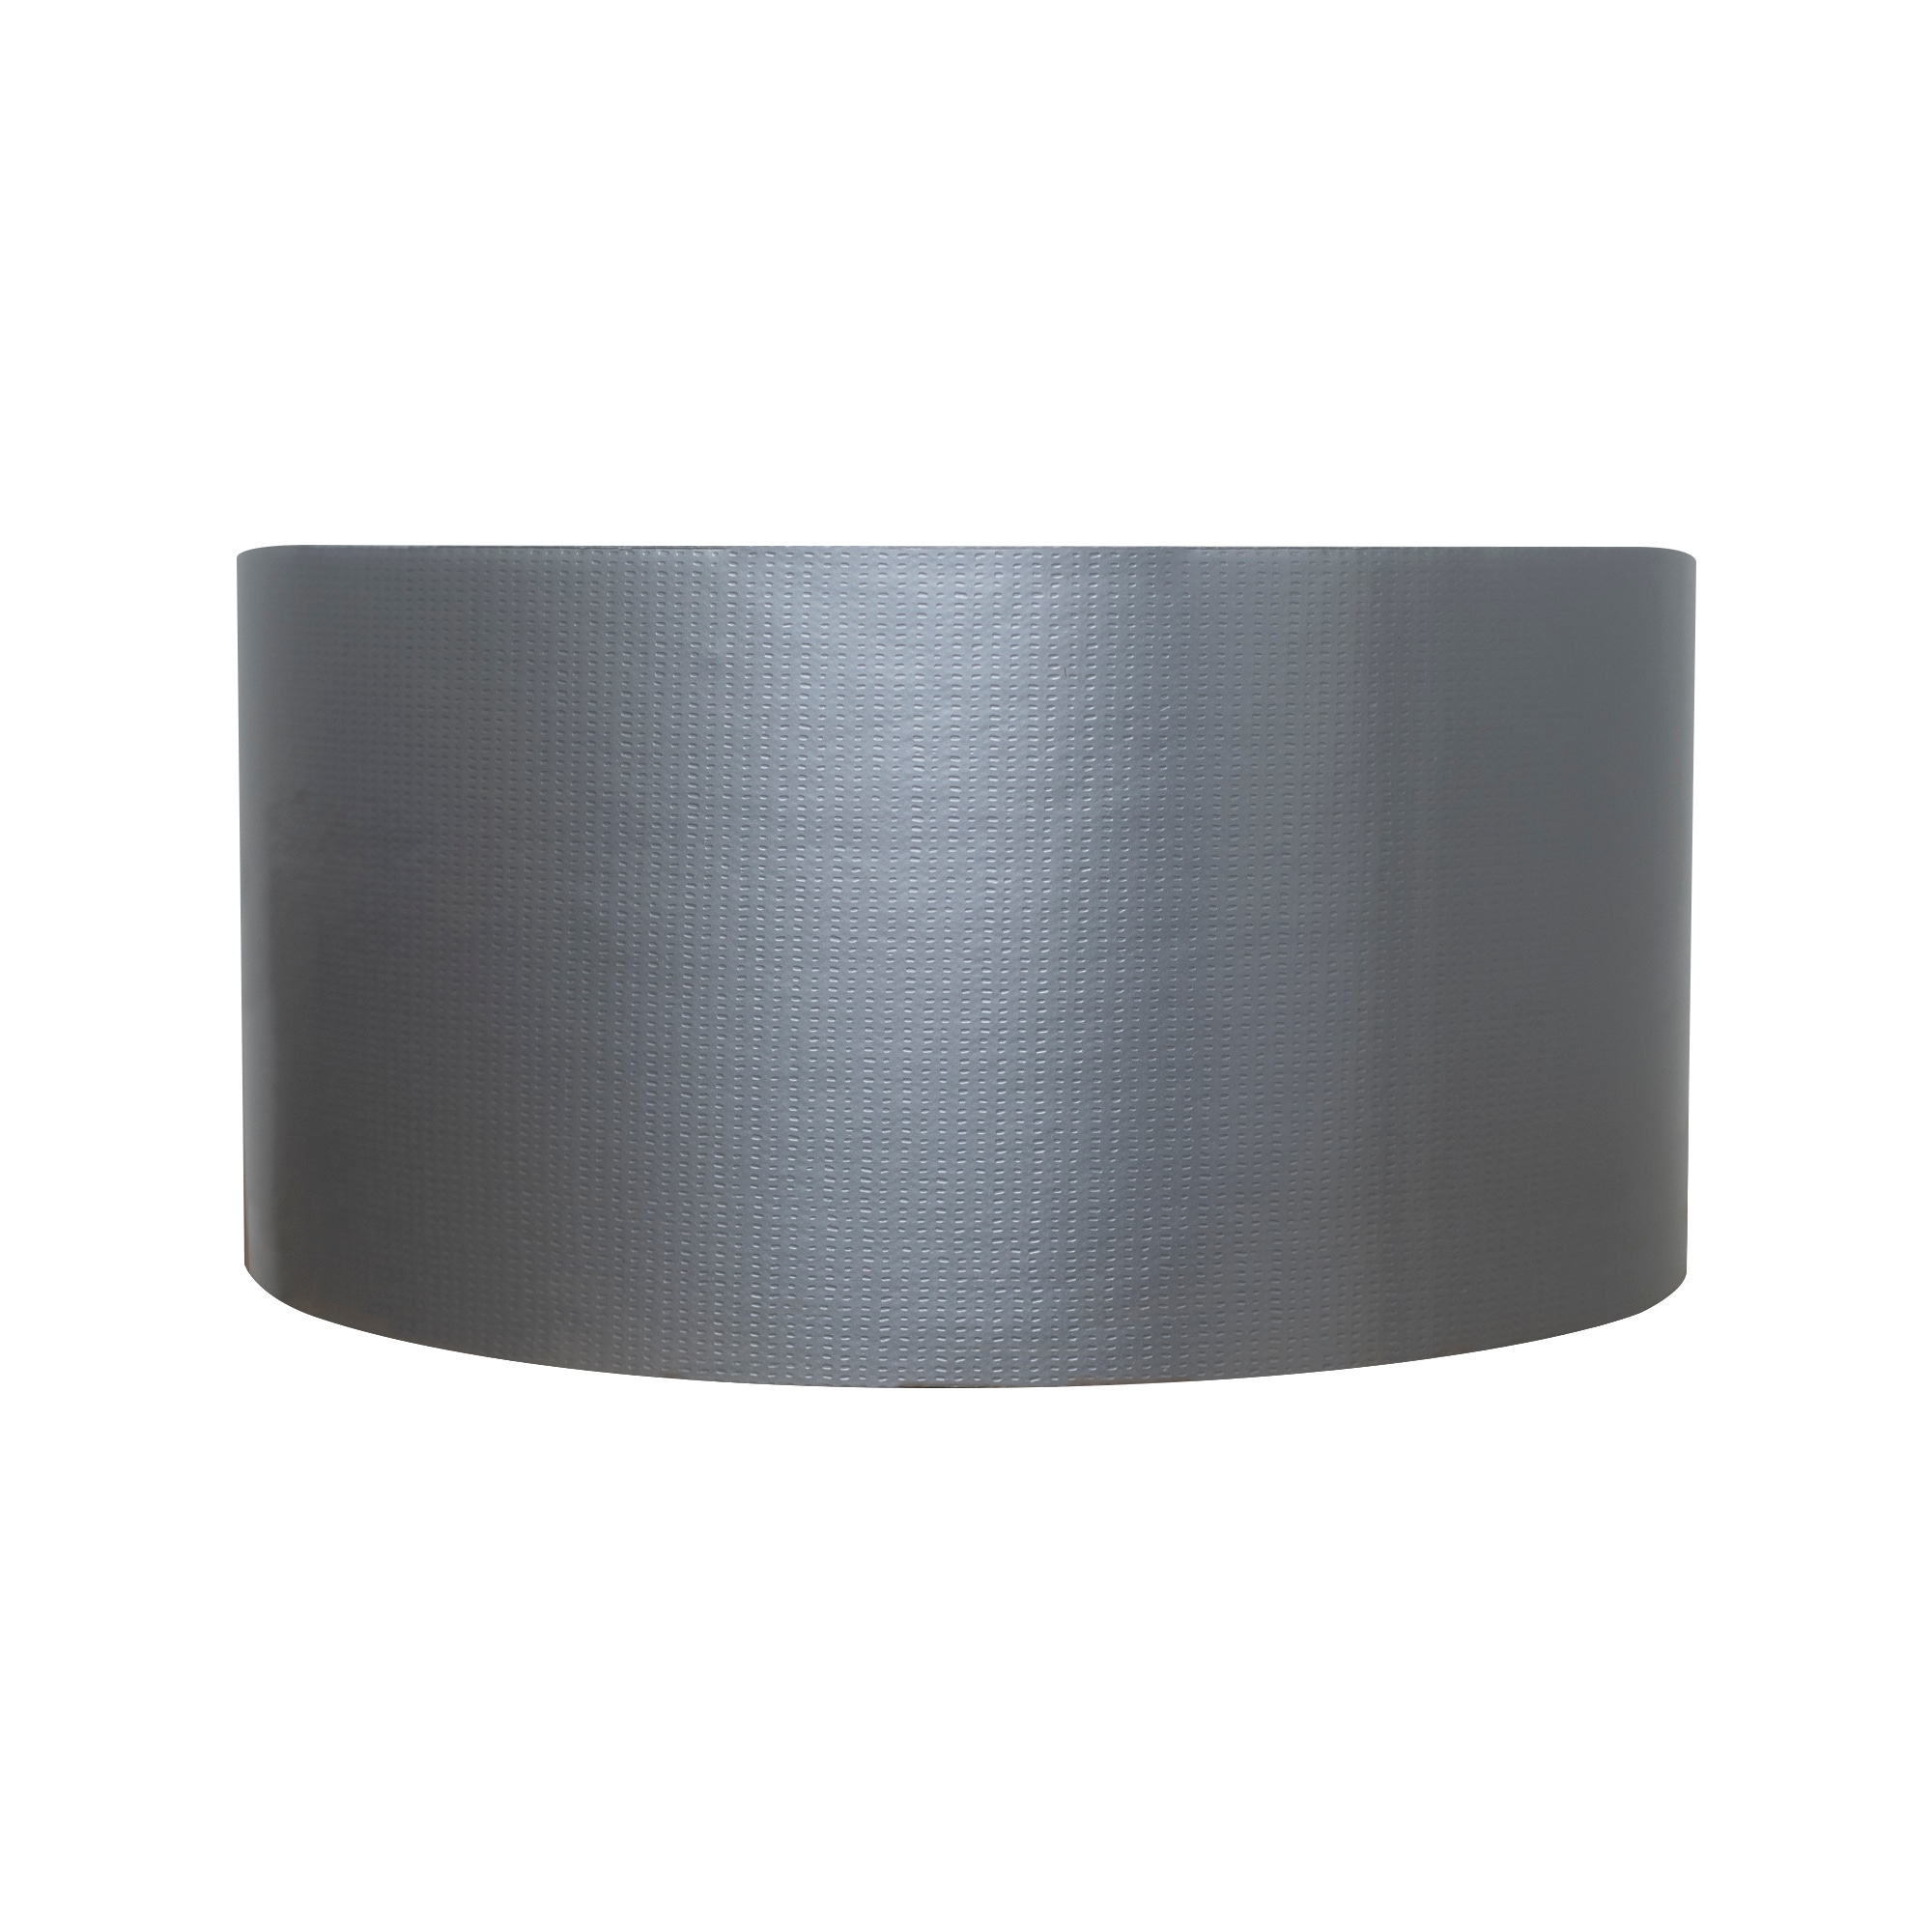 Gorilla 30 yd Silver Duct Tape 105634 - The Home Depot